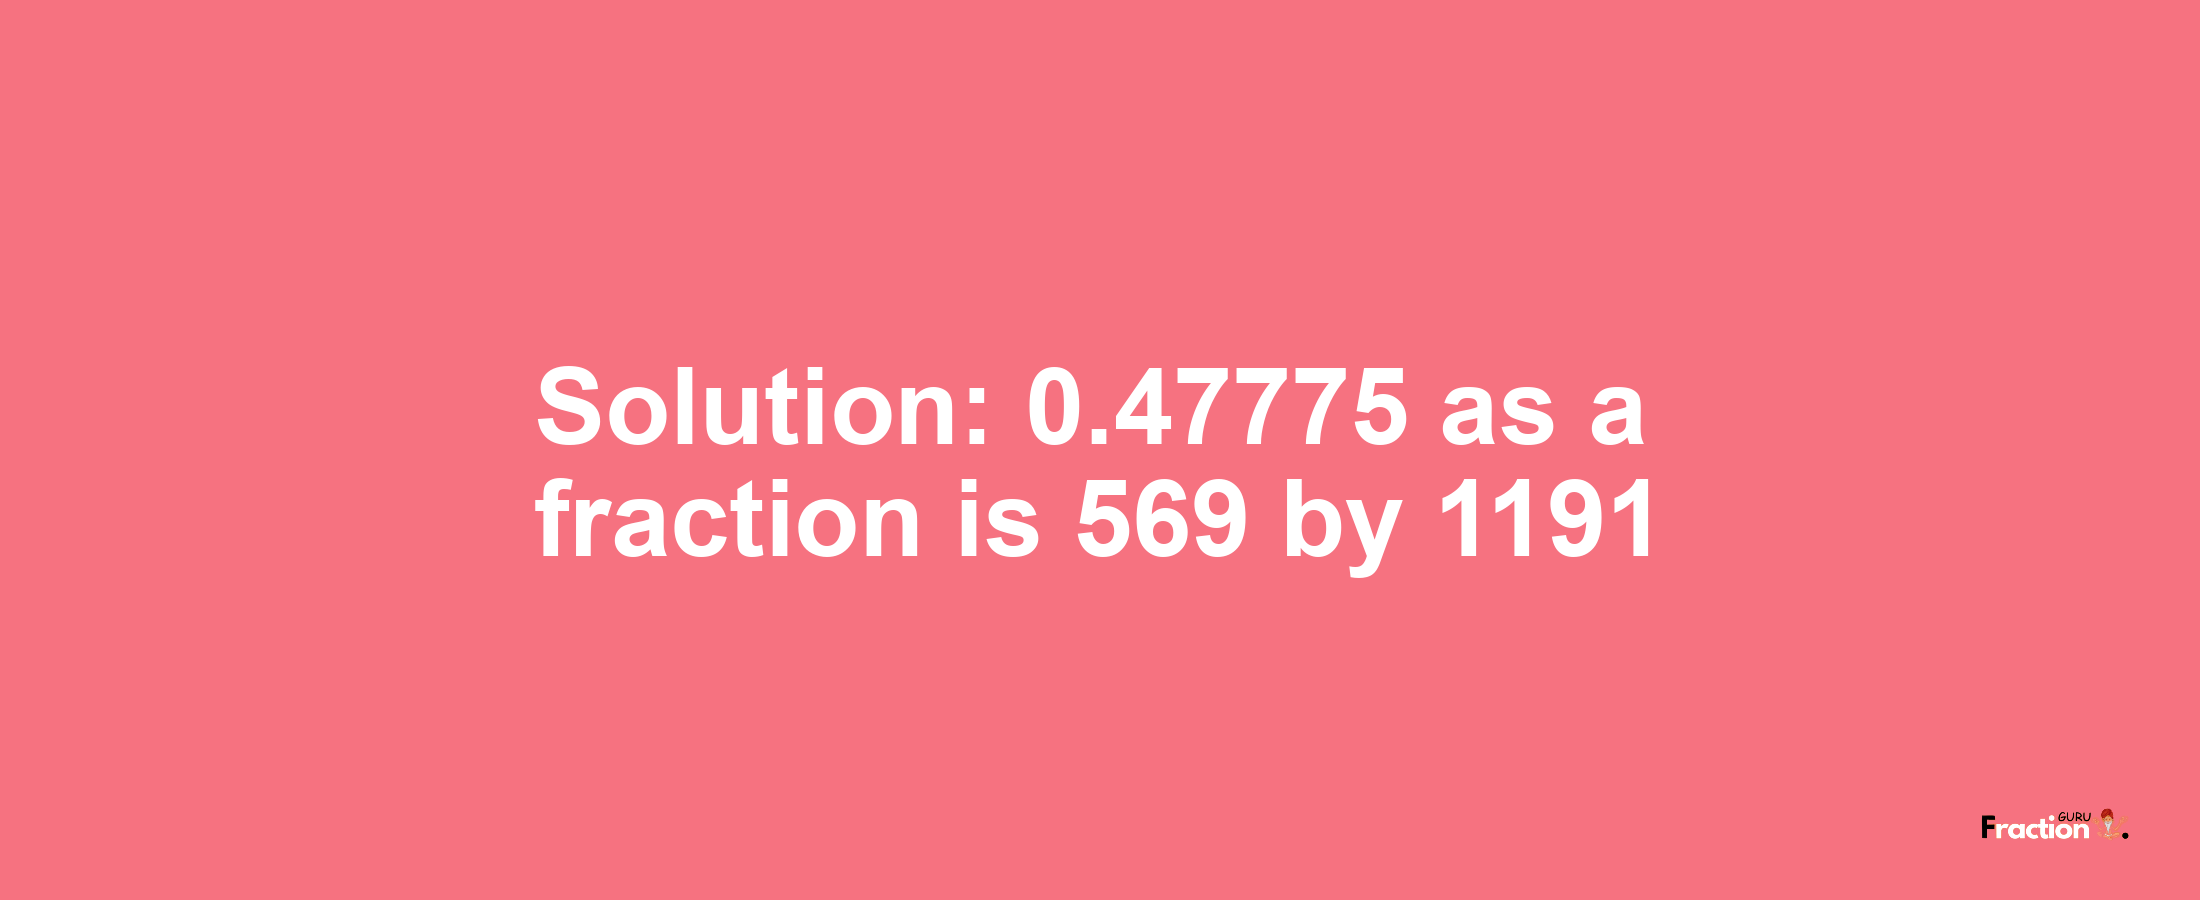 Solution:0.47775 as a fraction is 569/1191